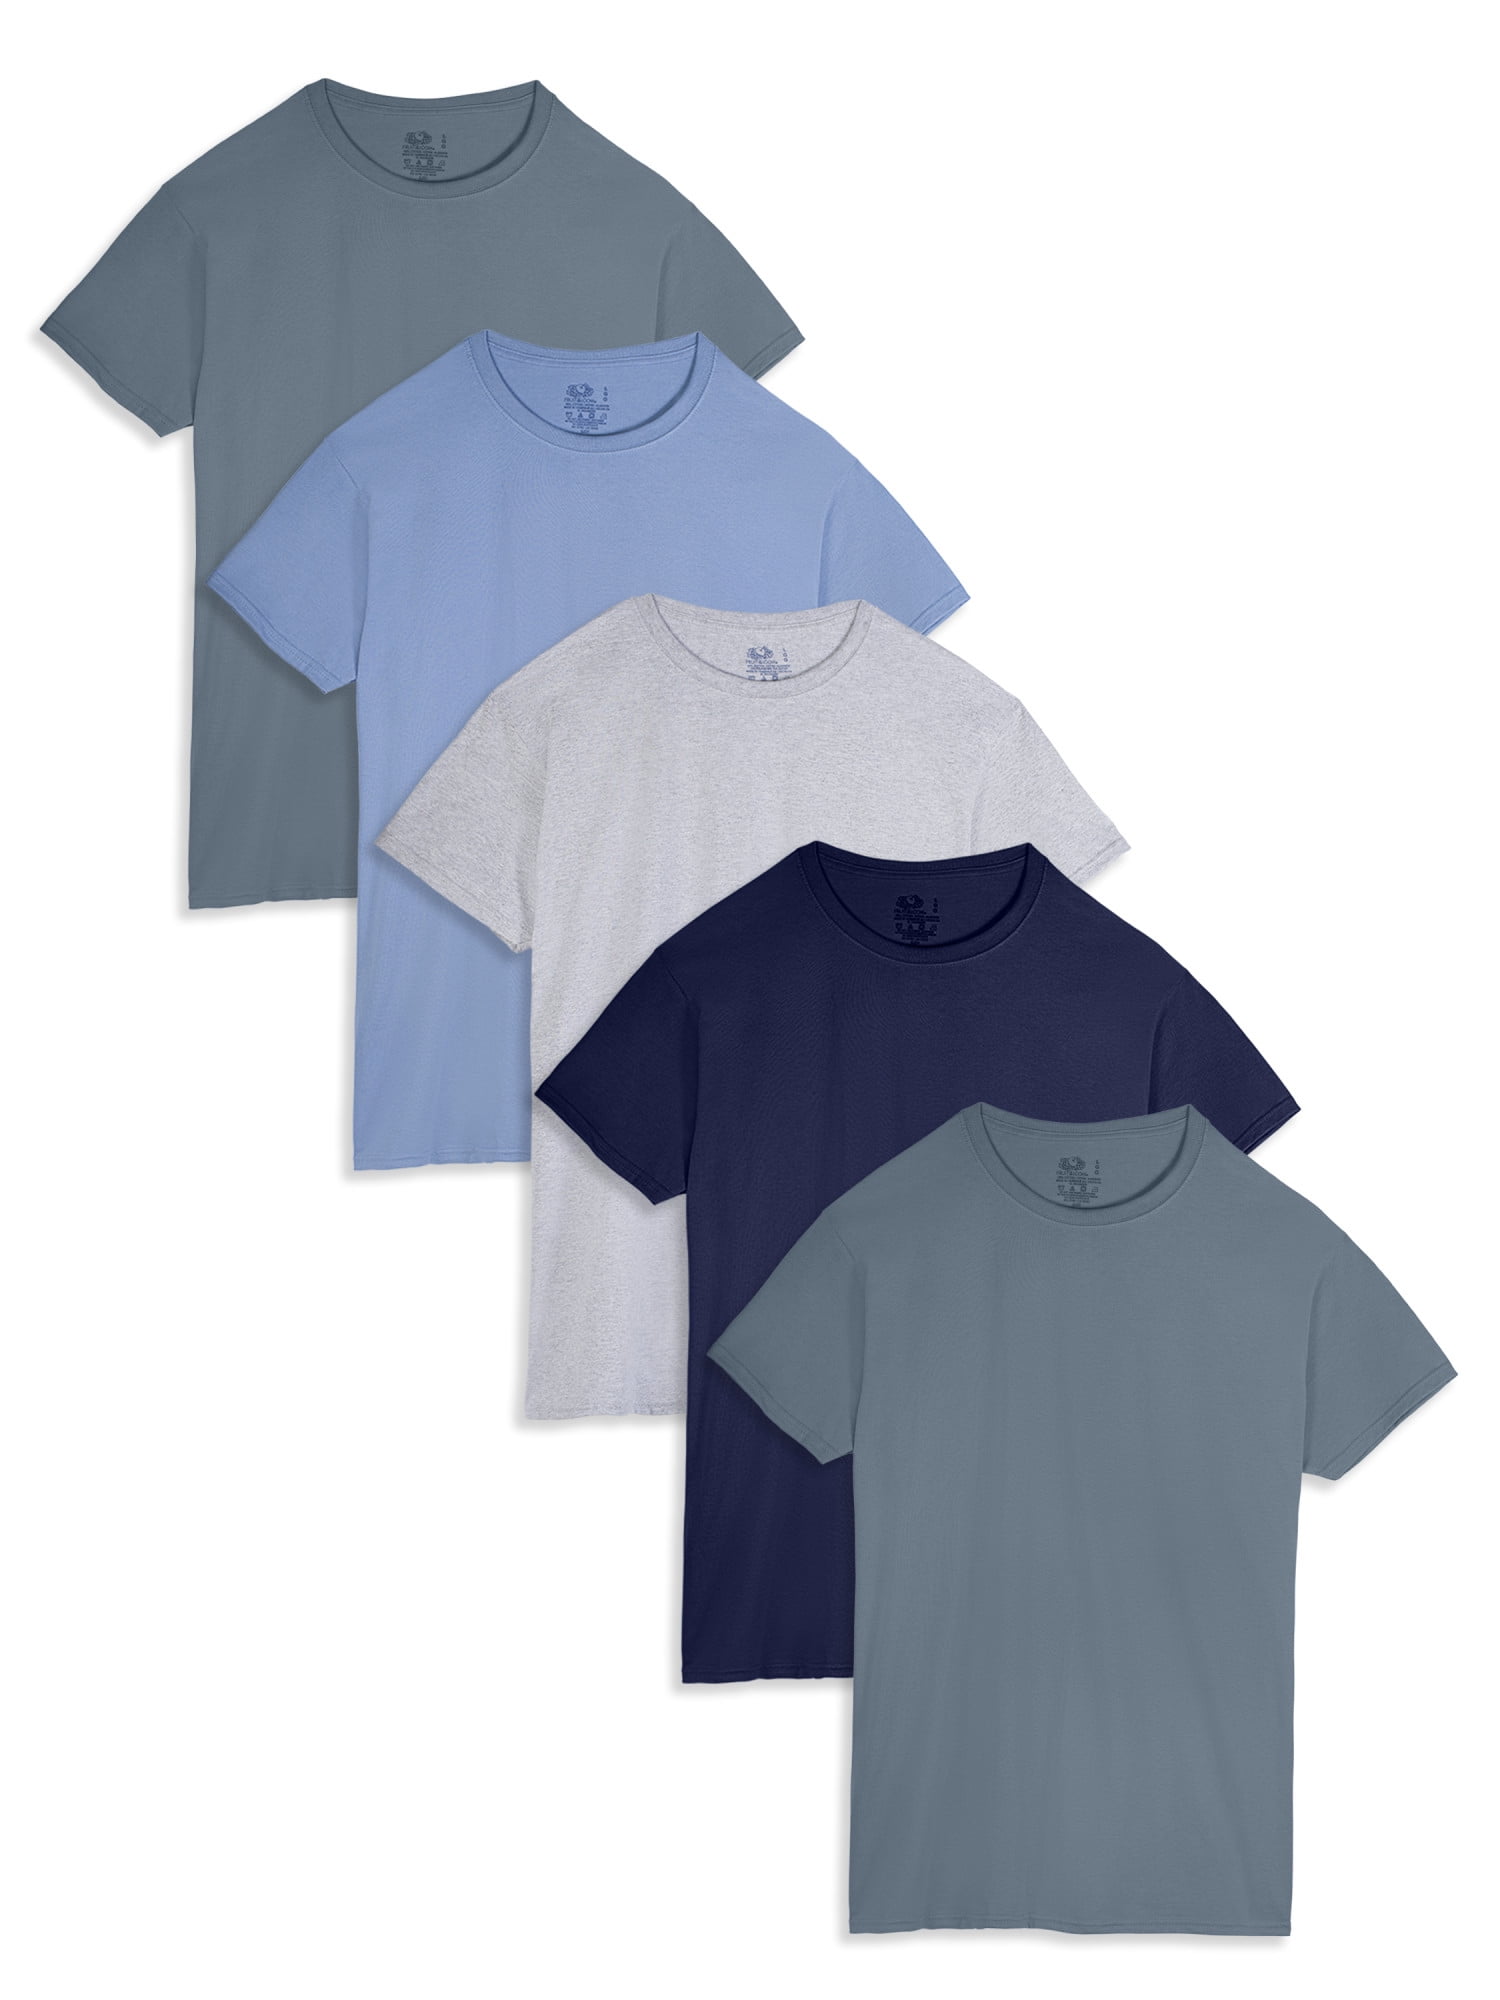 Fruit of the Loom Mens 8-Pack Softer Crew T-shirt 